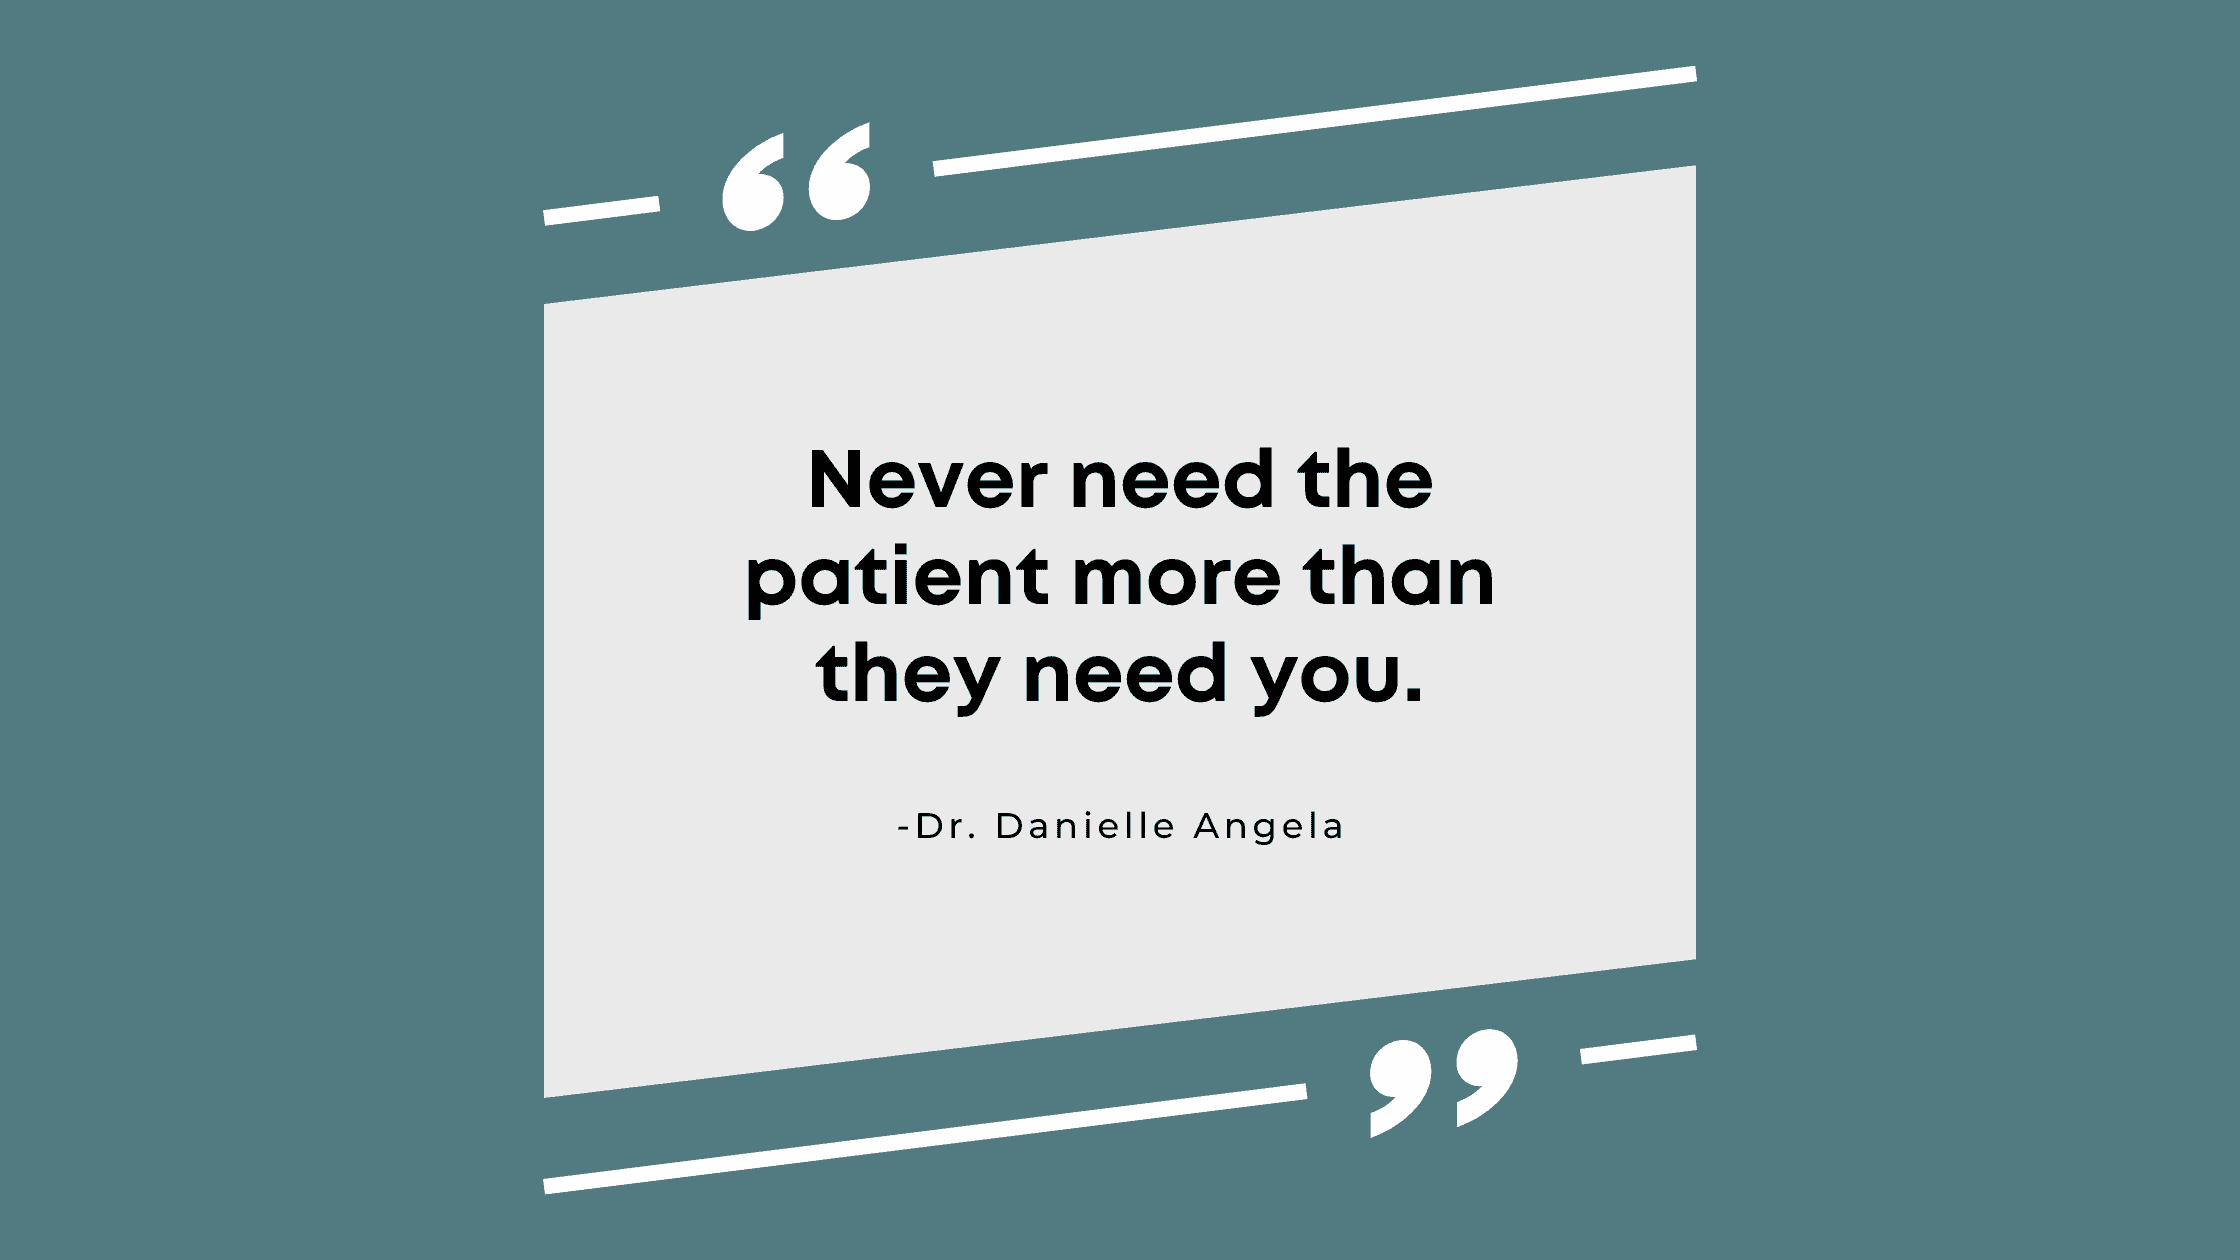 Never need the patient more than they need you.